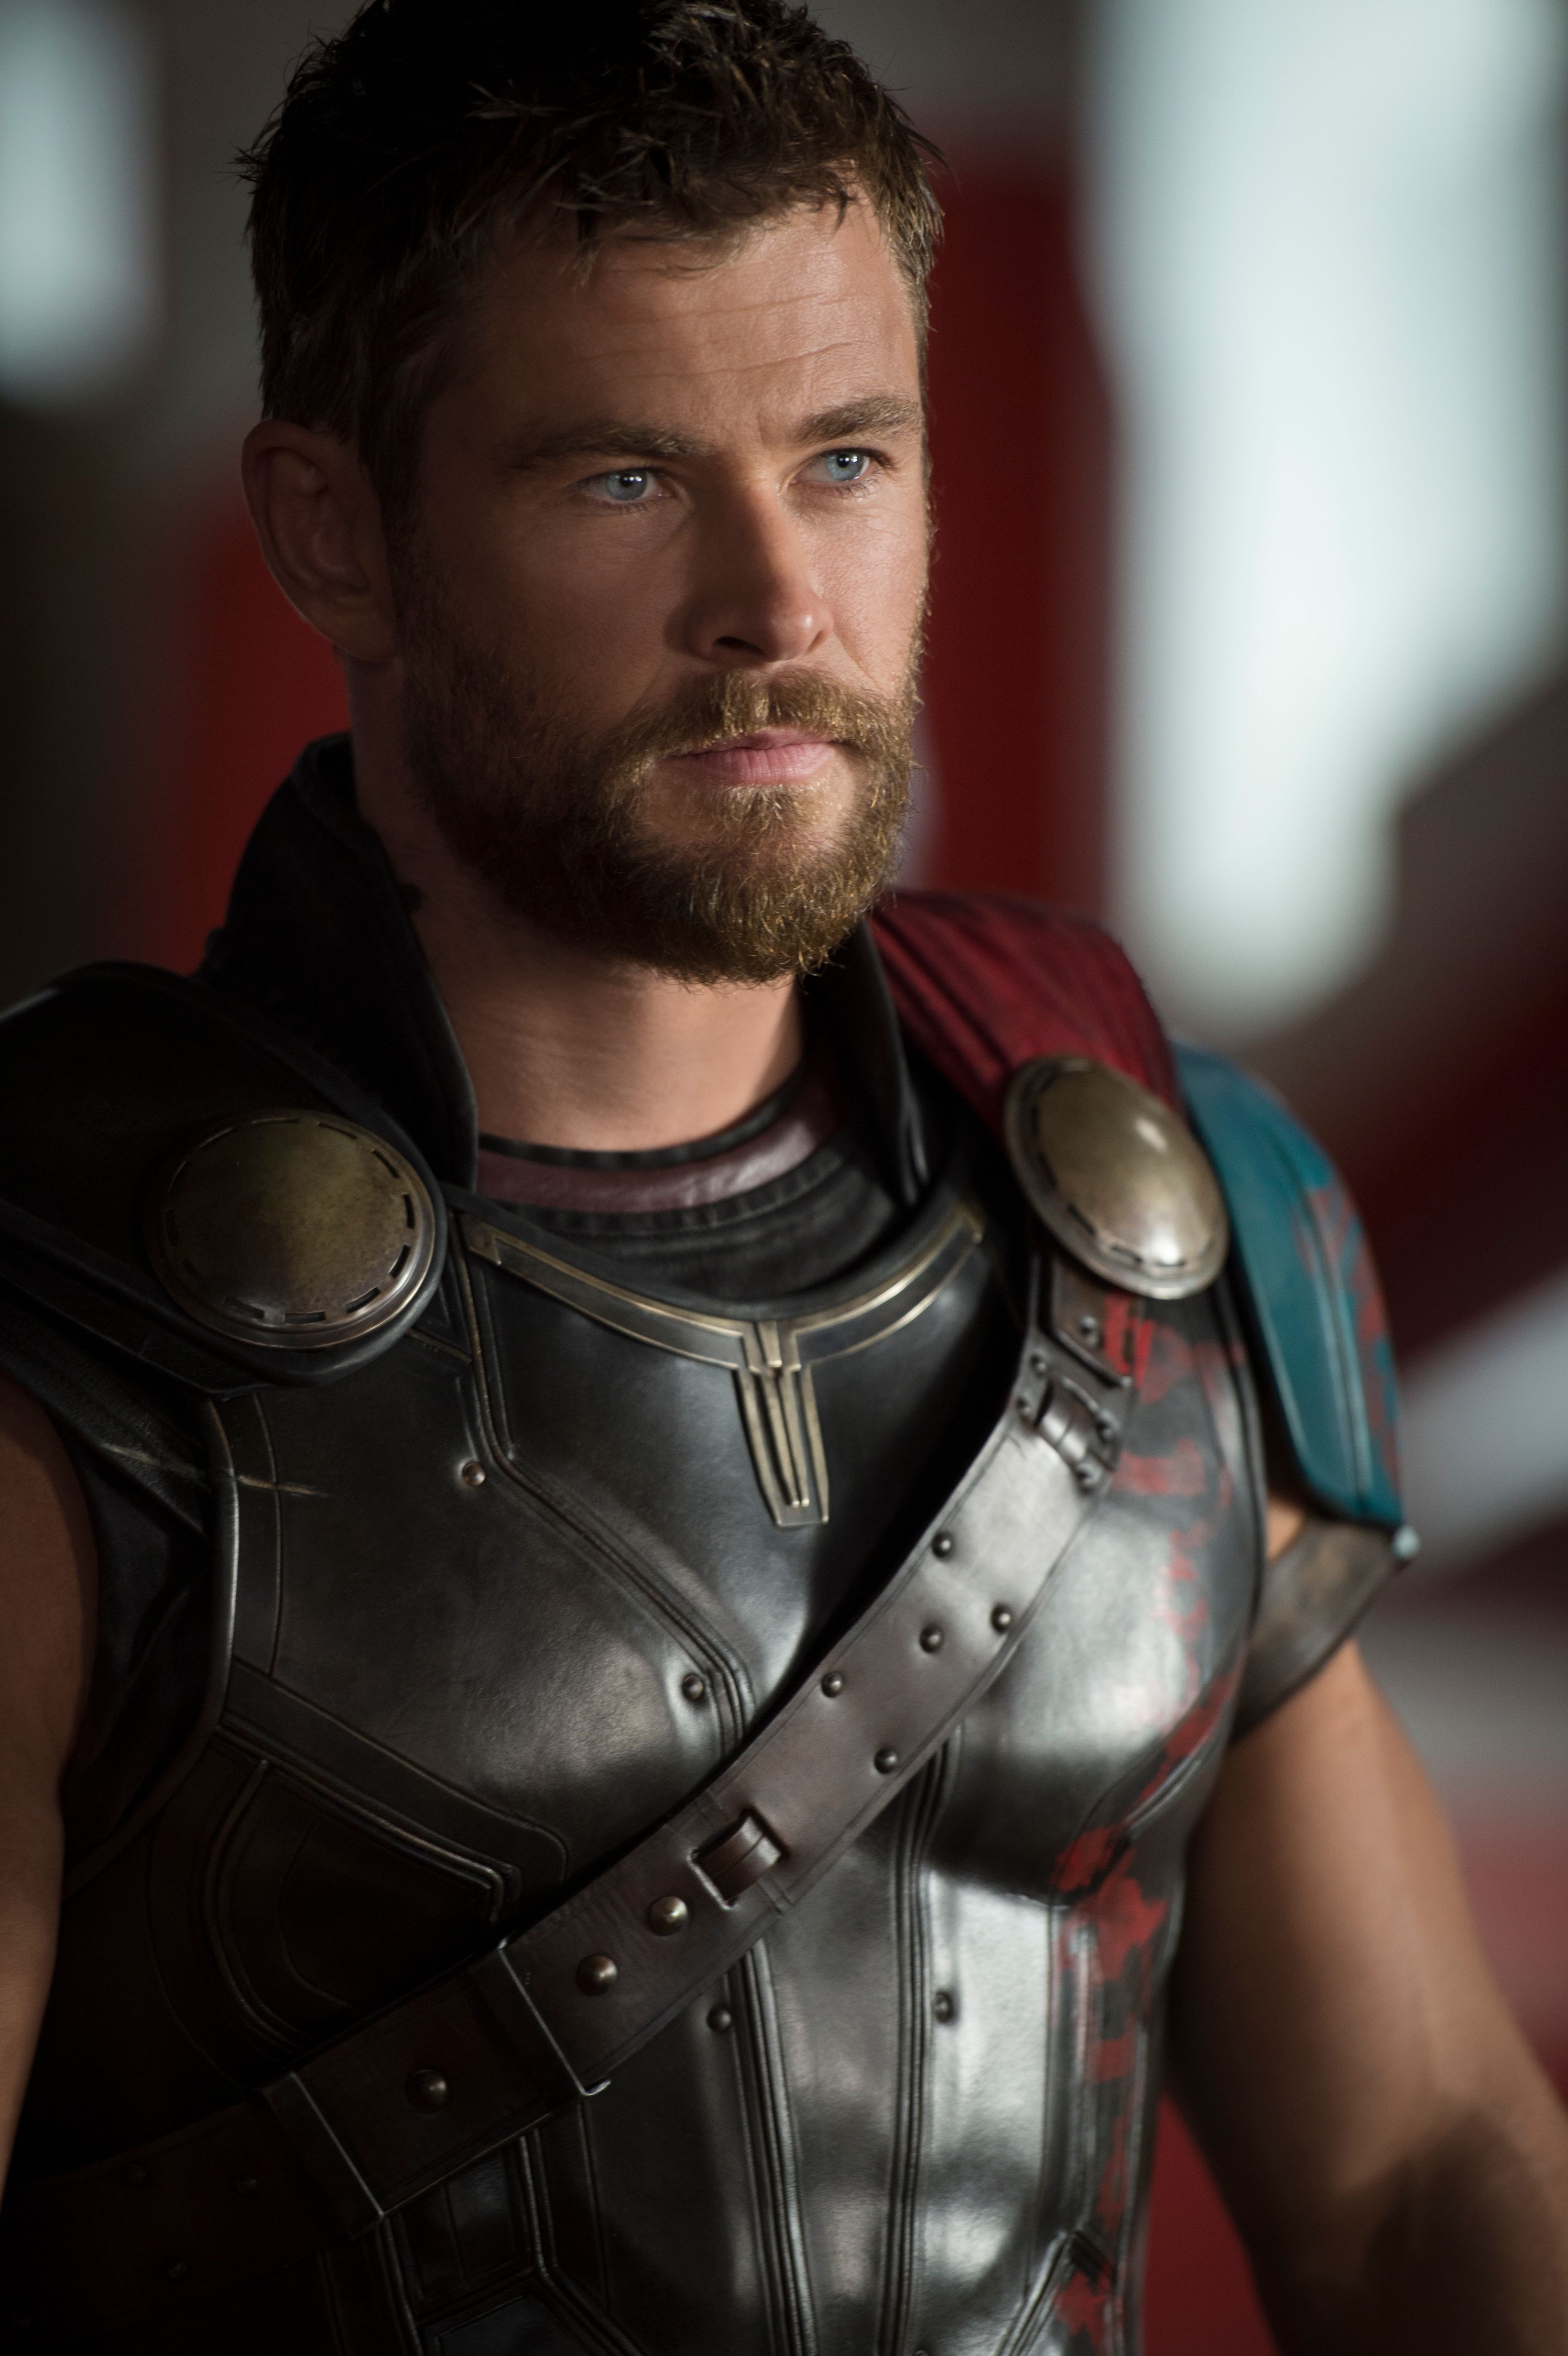 Chris Hemsworth on Thor: Ragnarok, MCU Connections, and More | Collider